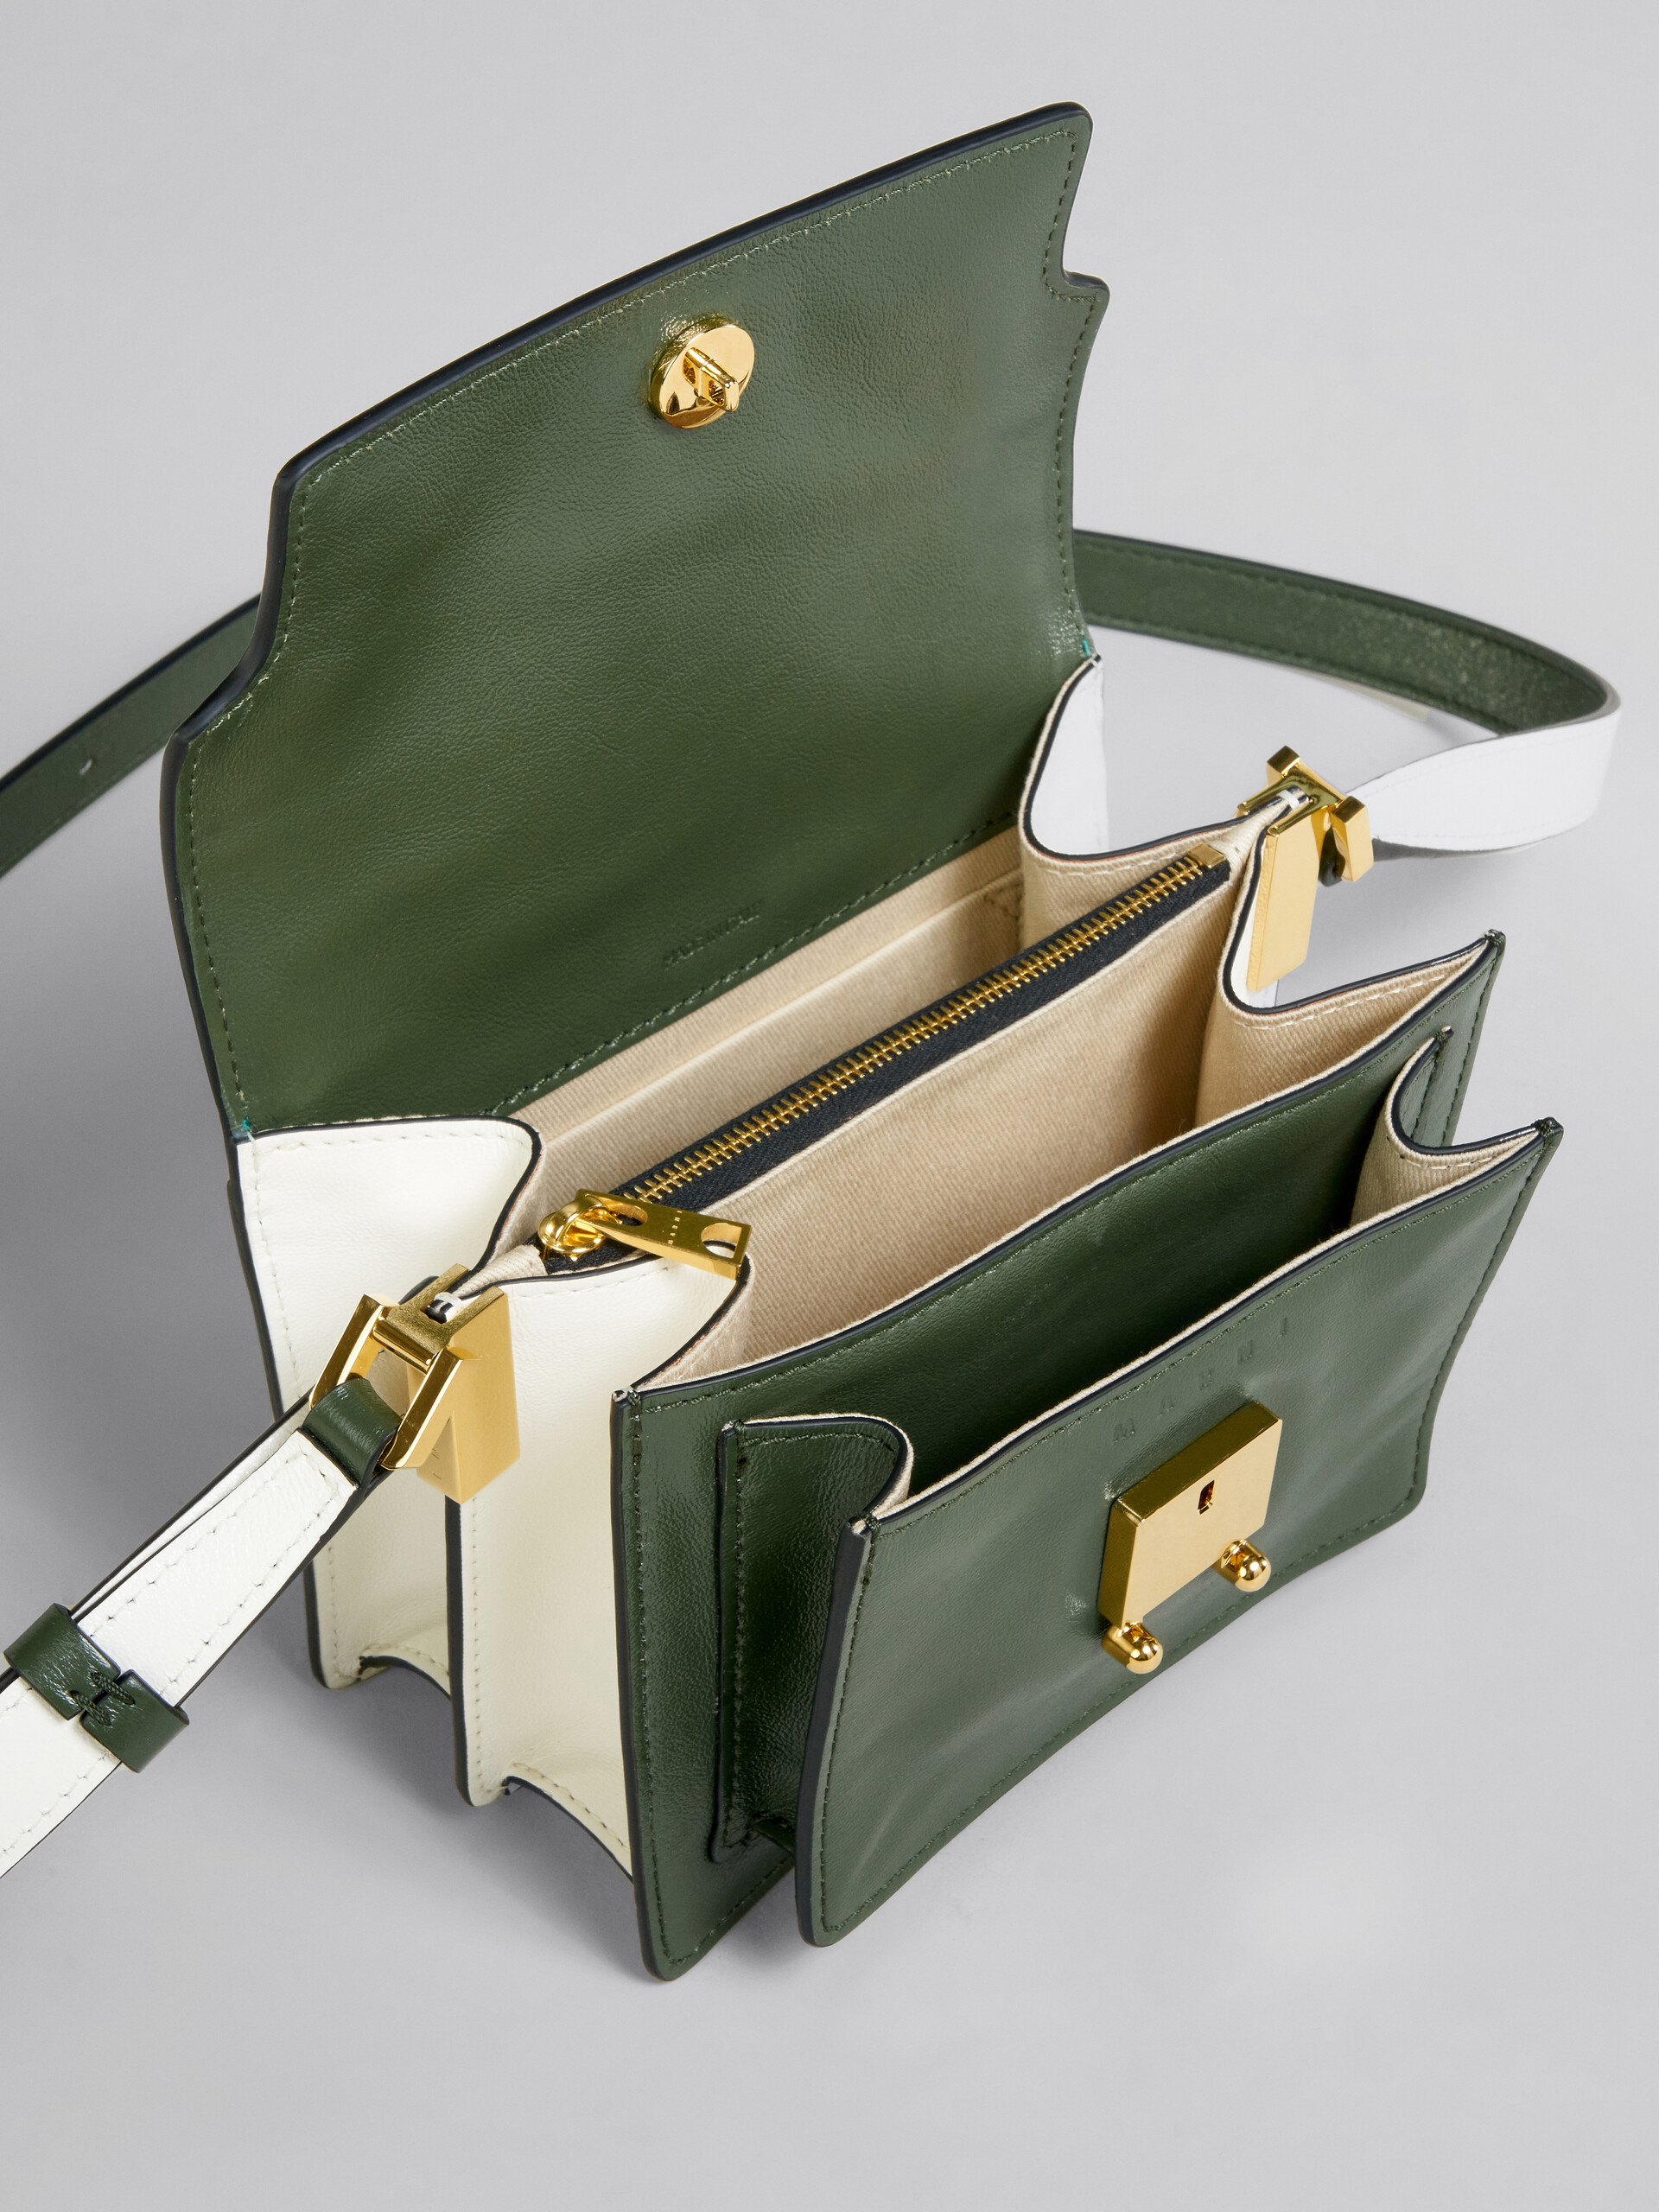 Trunk Soft Mini Bag in green and white leather - Shoulder Bag - Image 4